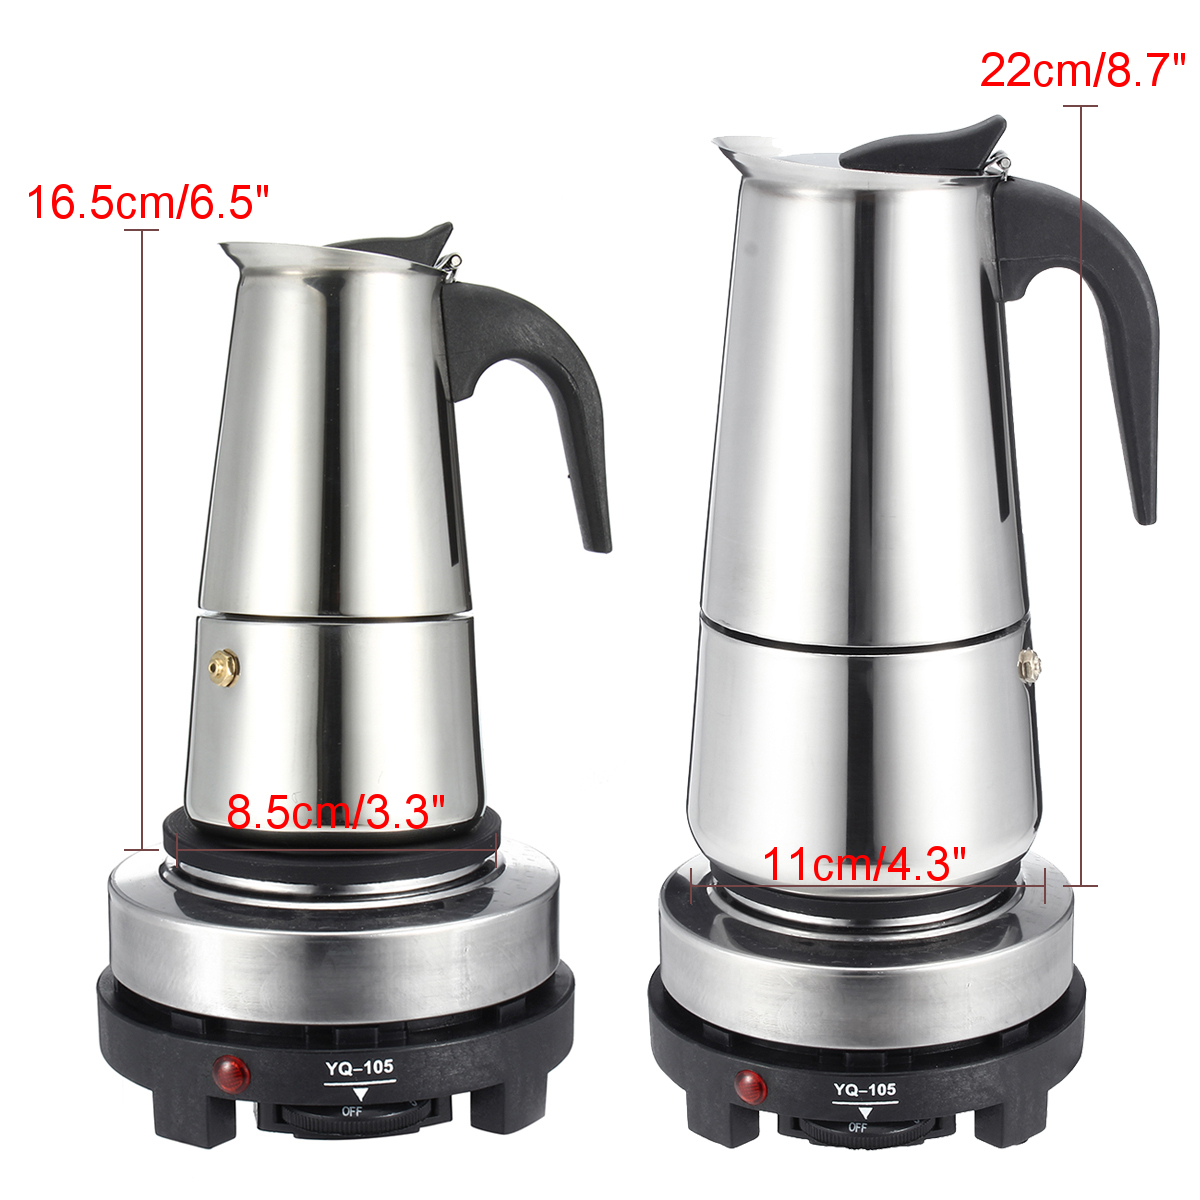 Espresso Moka Coffee Maker Pot Percolator Stainless Steel Electric Stove Electric Coffee Kettle 21